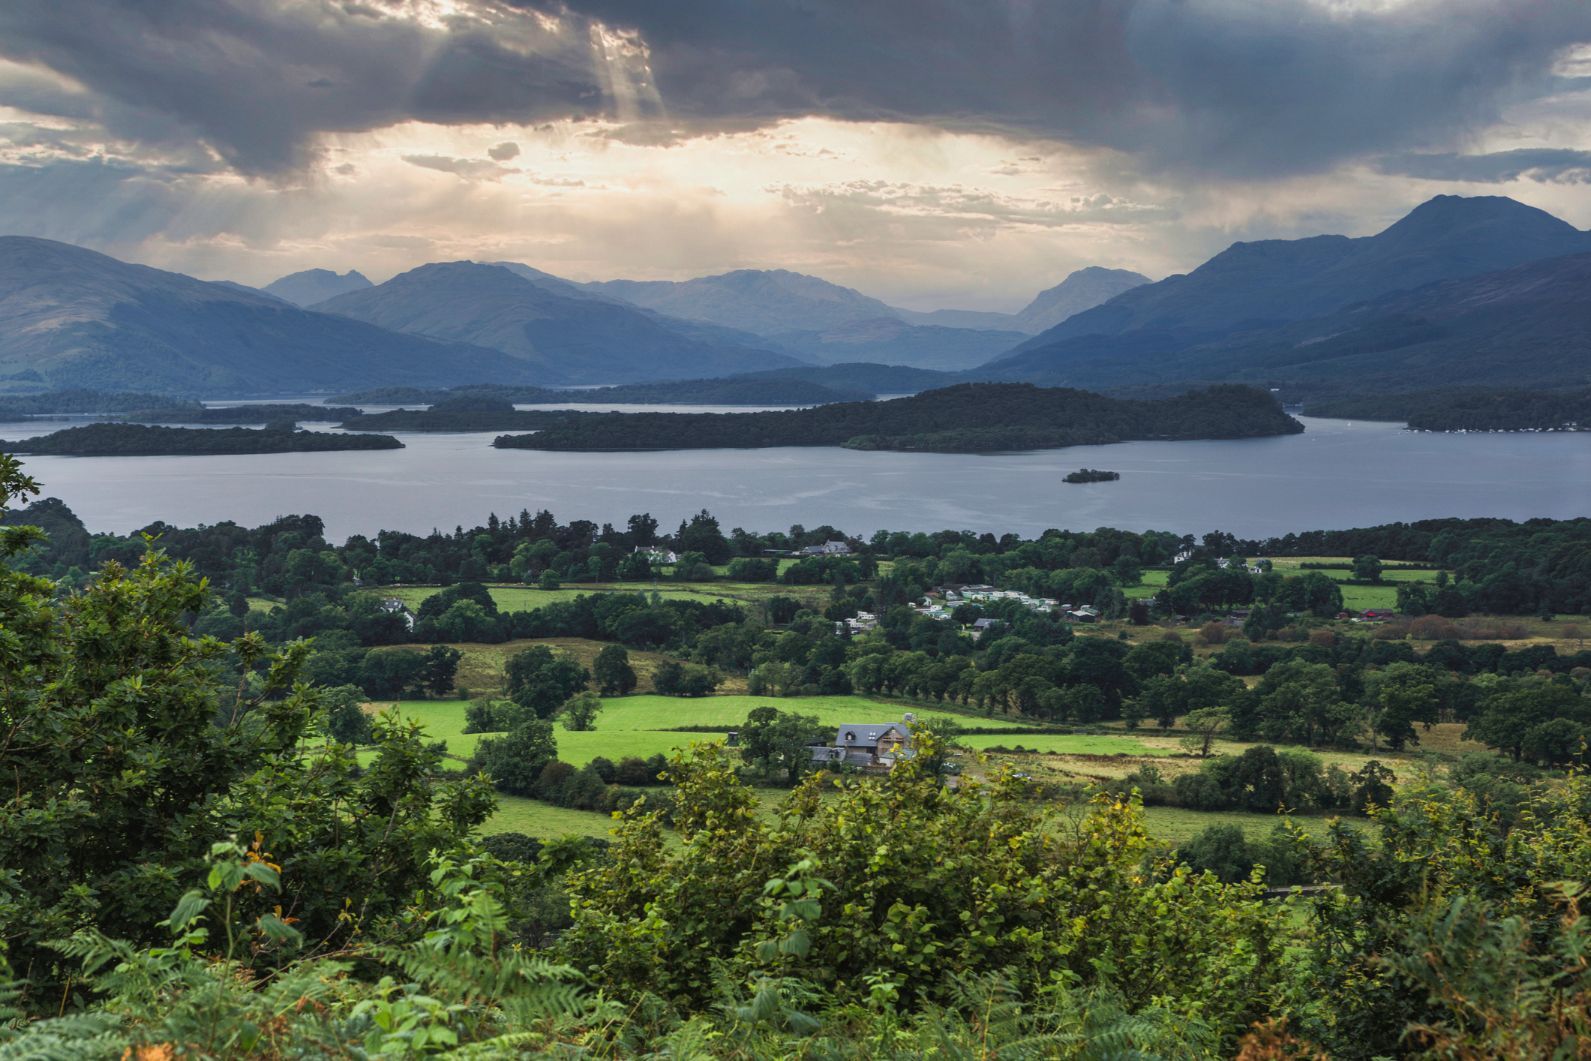 A panorama of Loch Lomond in front of Ben Lomond, seen from Duncryne Hill